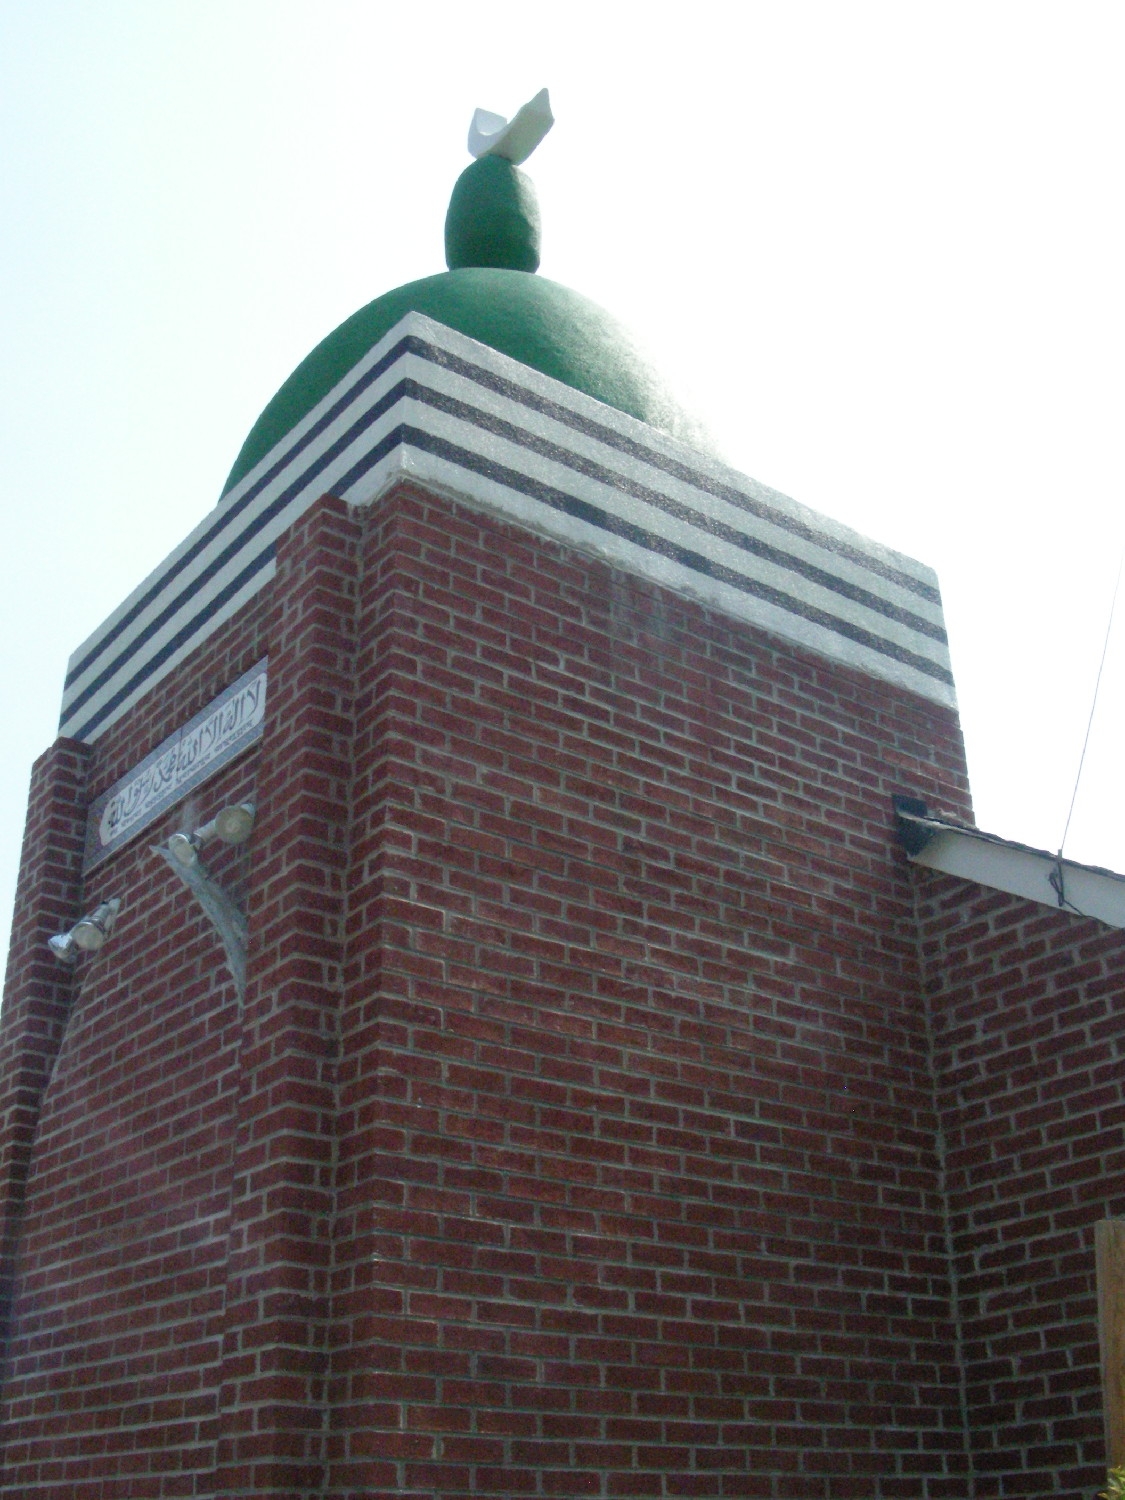 Front tower, topped with dome. Previously, this was the entrance to the former church.